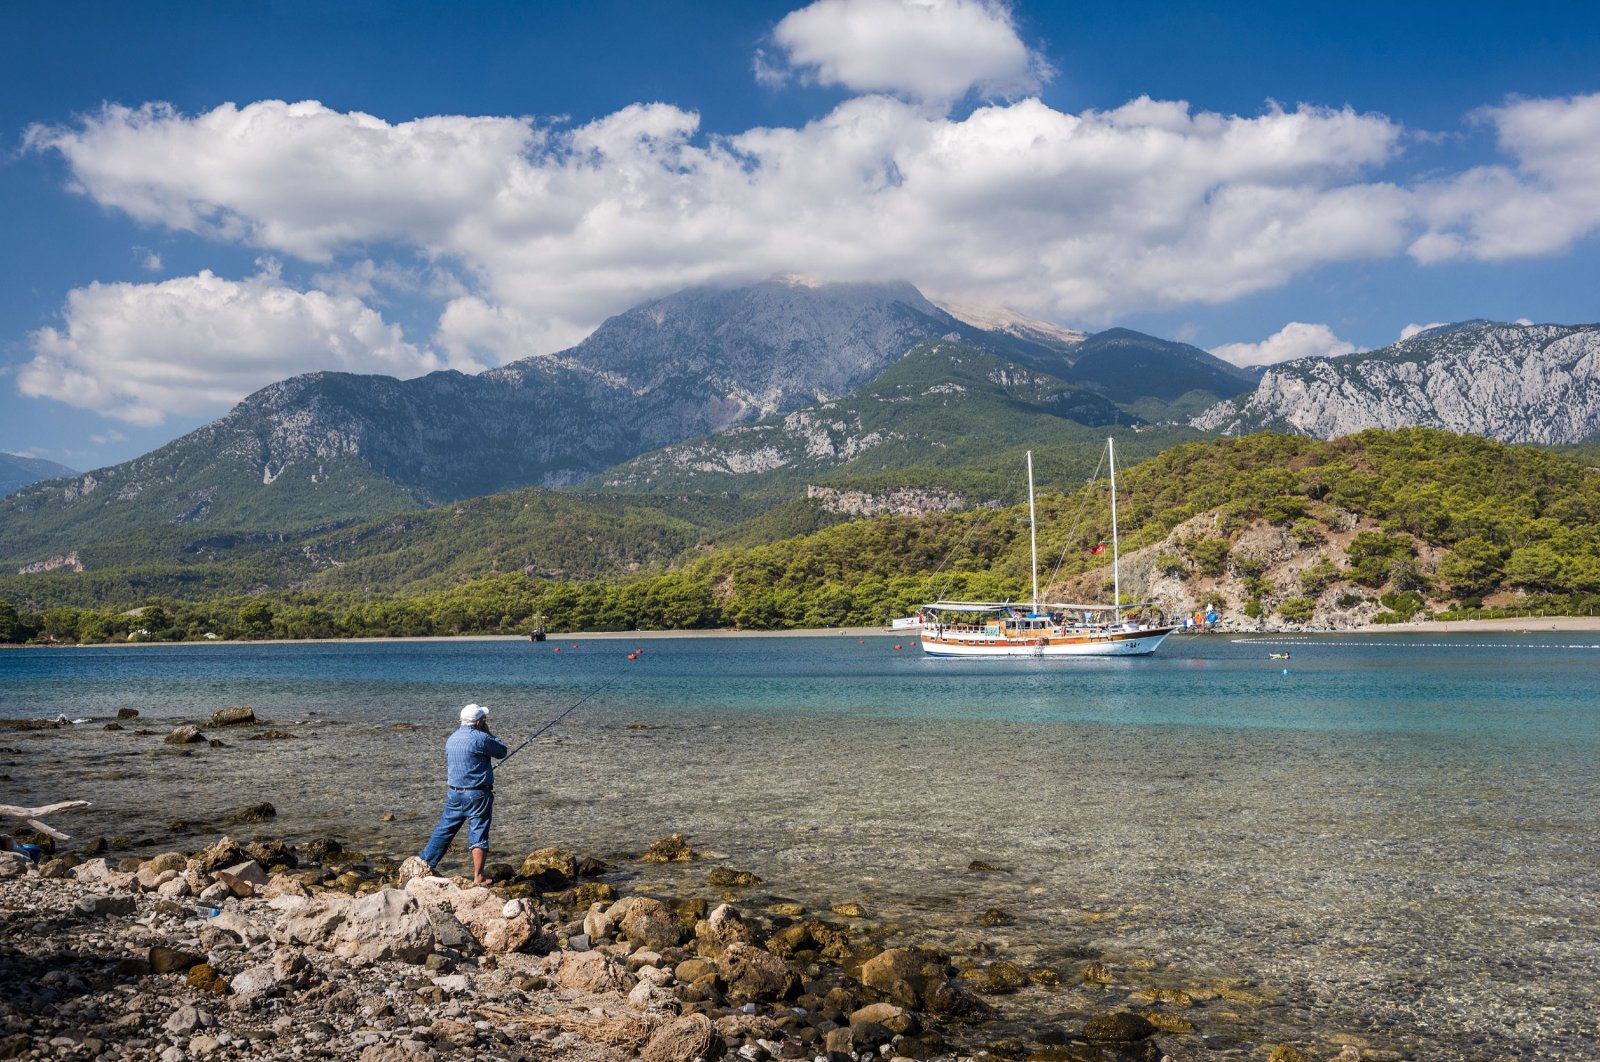 The bay at Phaselis near Kemer, Antalya on Turkey's Mediterranean coast.  (Universal Images Group via Getty Images)